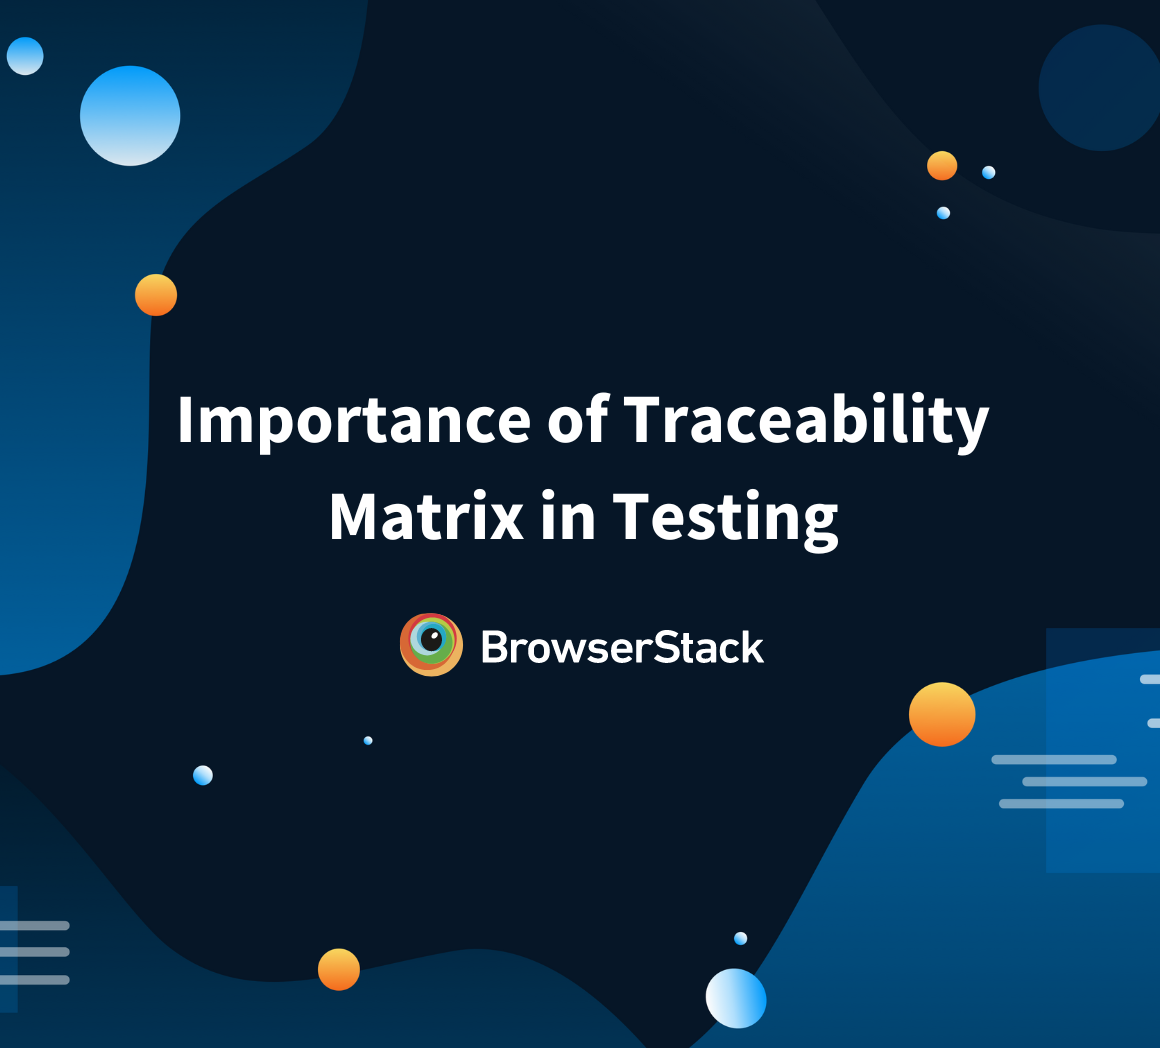 Importance of Traceability Matrix in Testing